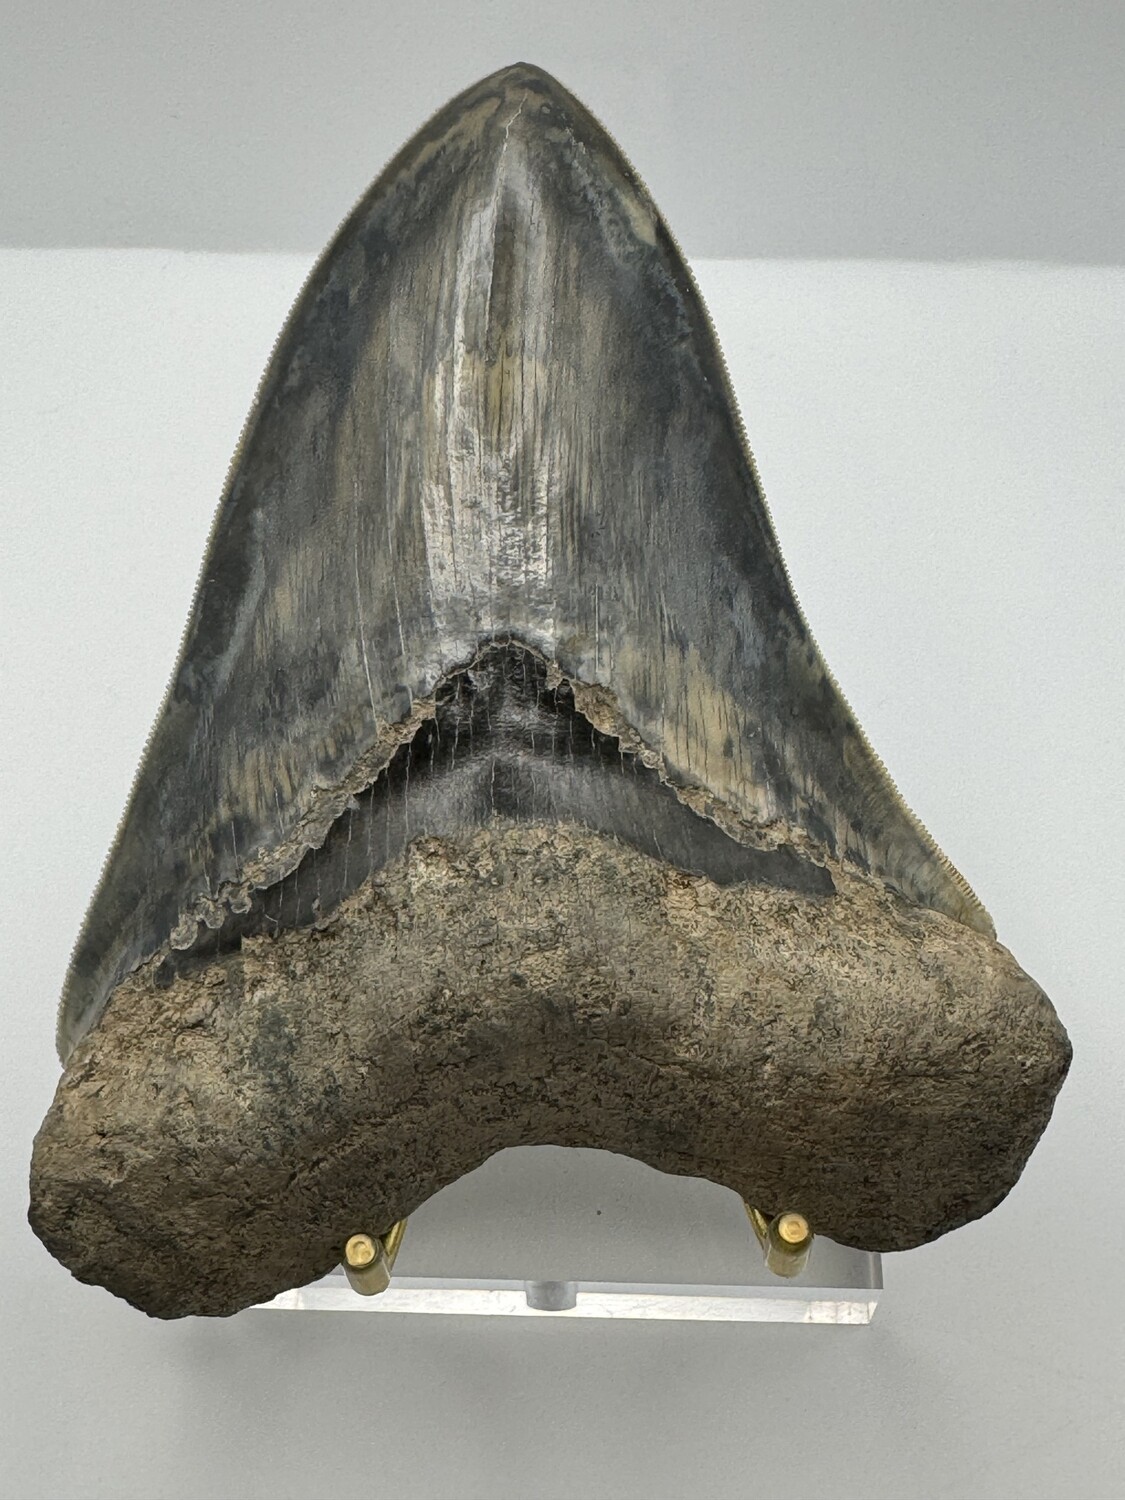 5.483" Megalodon Tooth fossil